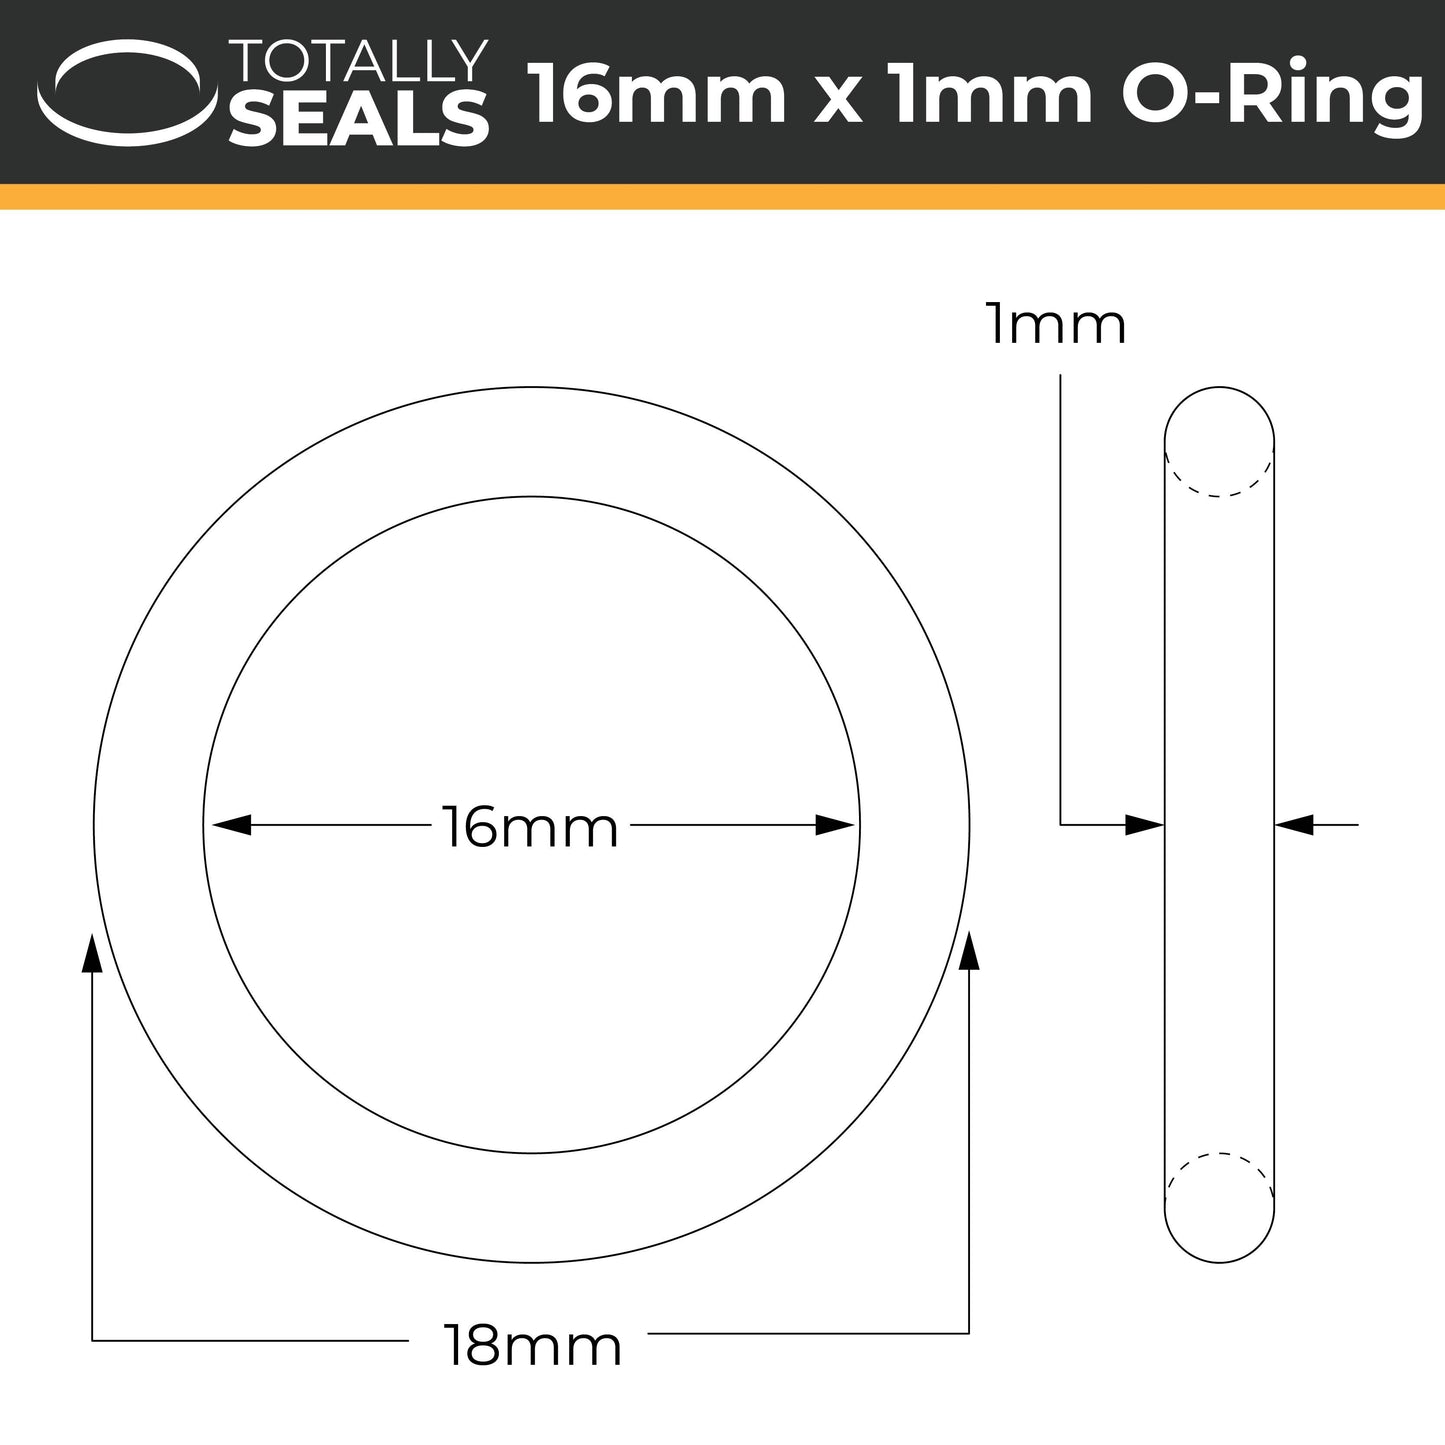 16mm x 1mm (18mm OD) Nitrile O-Rings - Totally Seals®